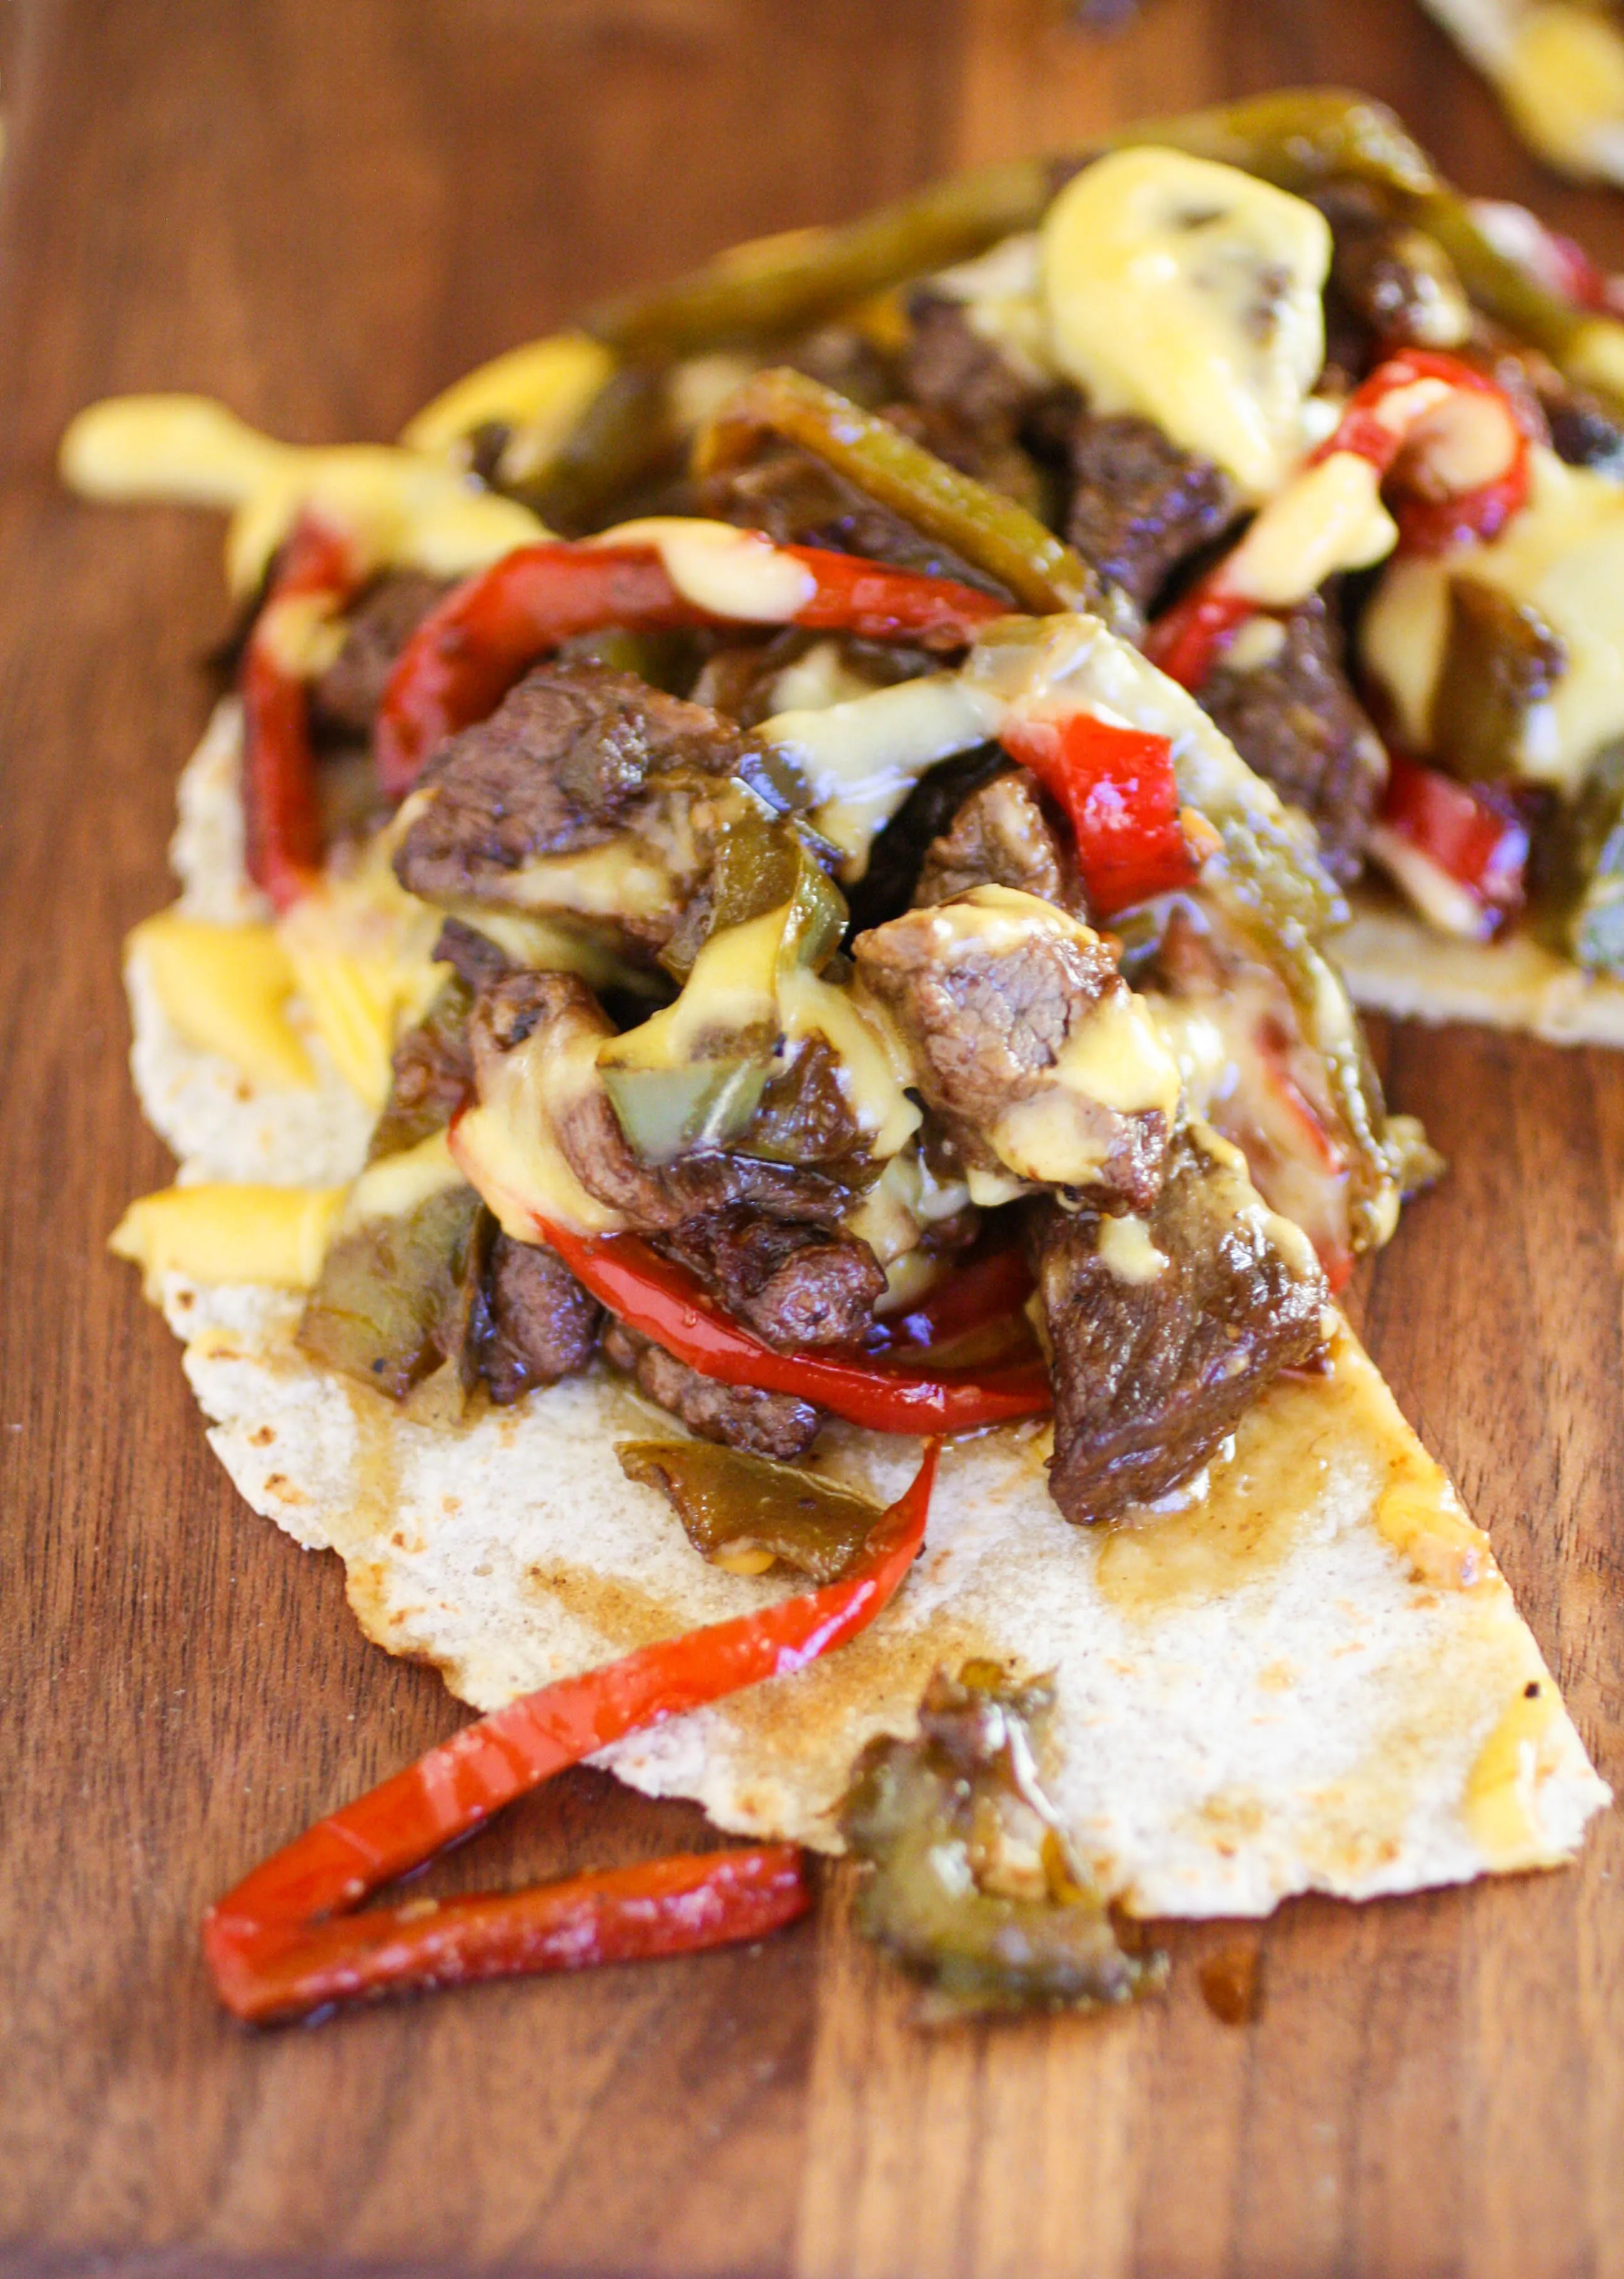 Philly Cheesesteak Tostadas make a fun meal that is filling and flavorful. You'll love these Philly Cheesesteak Tostadas!